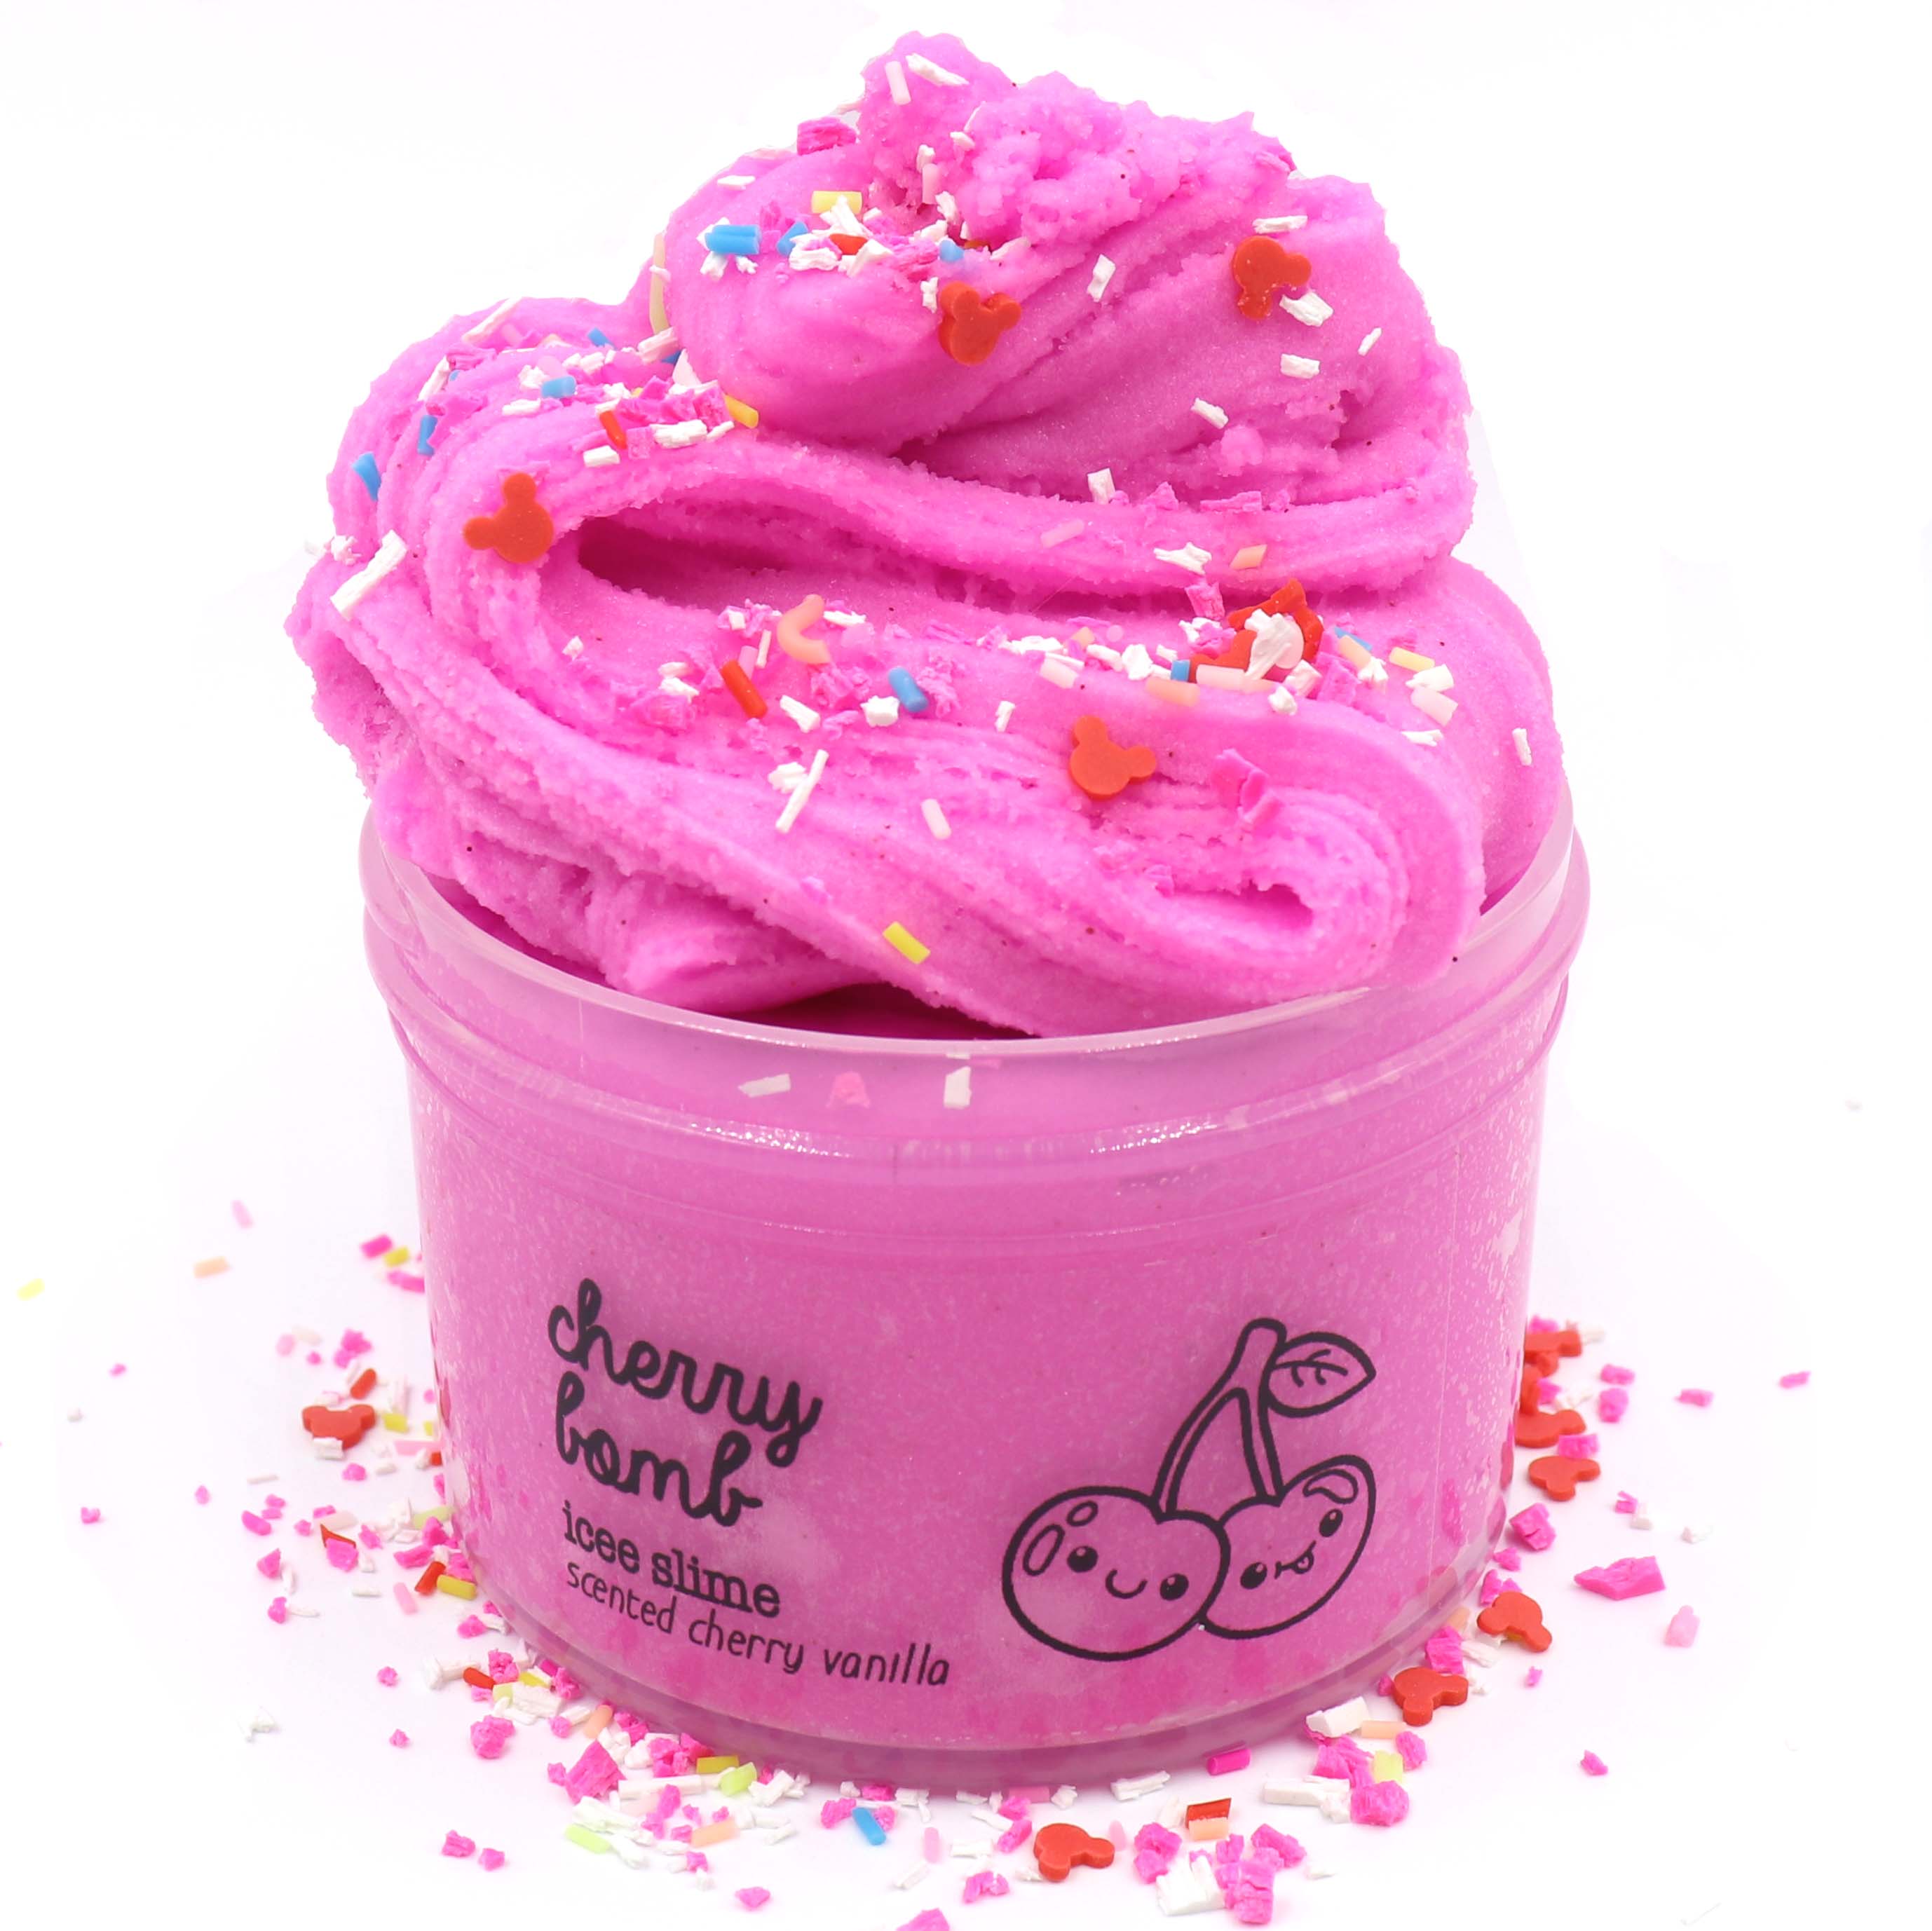 Cherry Bomb Neon Pink Sprinkles Fruity Fruit Soft Icee Slime Fantasies Shop 7oz Front View